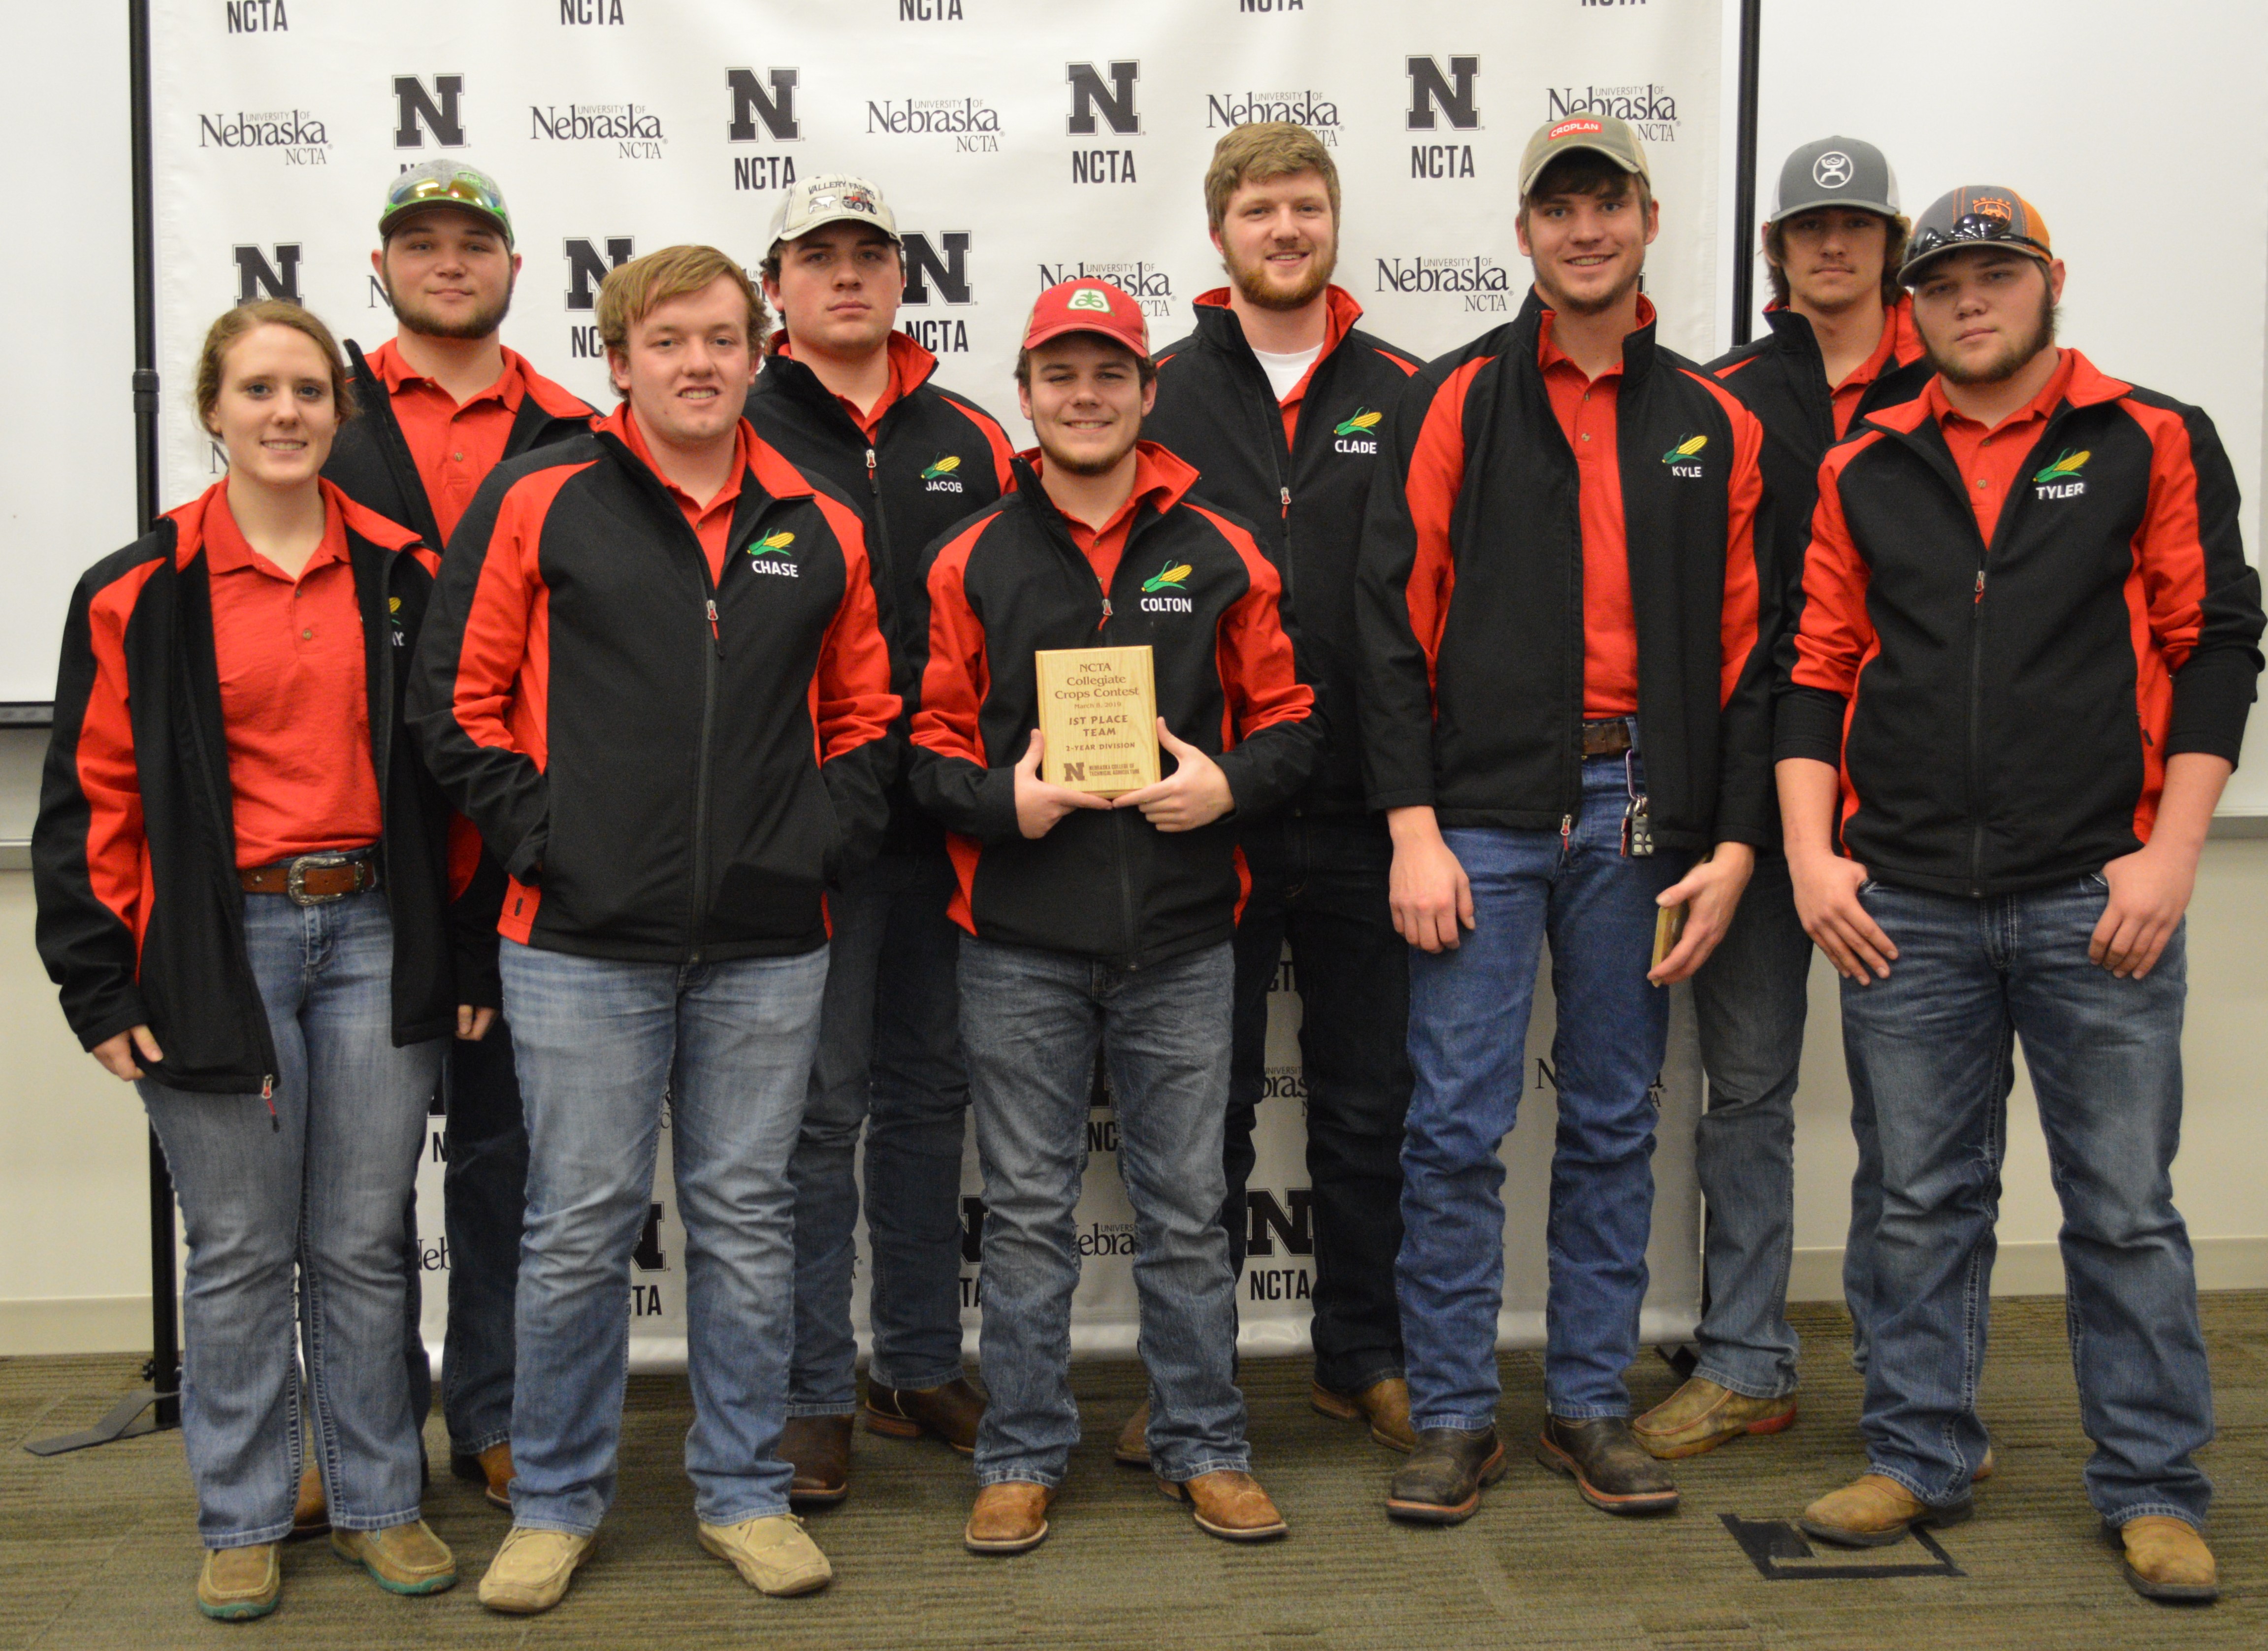 The NCTA Aggies team won first place among 2-year colleges in crops judging. Sophomore and freshmen students combined for this awards photo, from left, Amy Lammers, Ethan Aschenbrenner, Chase Callahan, Jacob Vallery (3rd place individual), Colton Bell, Clade Anderson, Kyle Krantz (1st place individual), Corbin Moore, and Tyler Aschenbrenner. Catherine Ljunggren (5th place individual) was unavailable for the photo. (E. Griffiths / NCTA Photo)